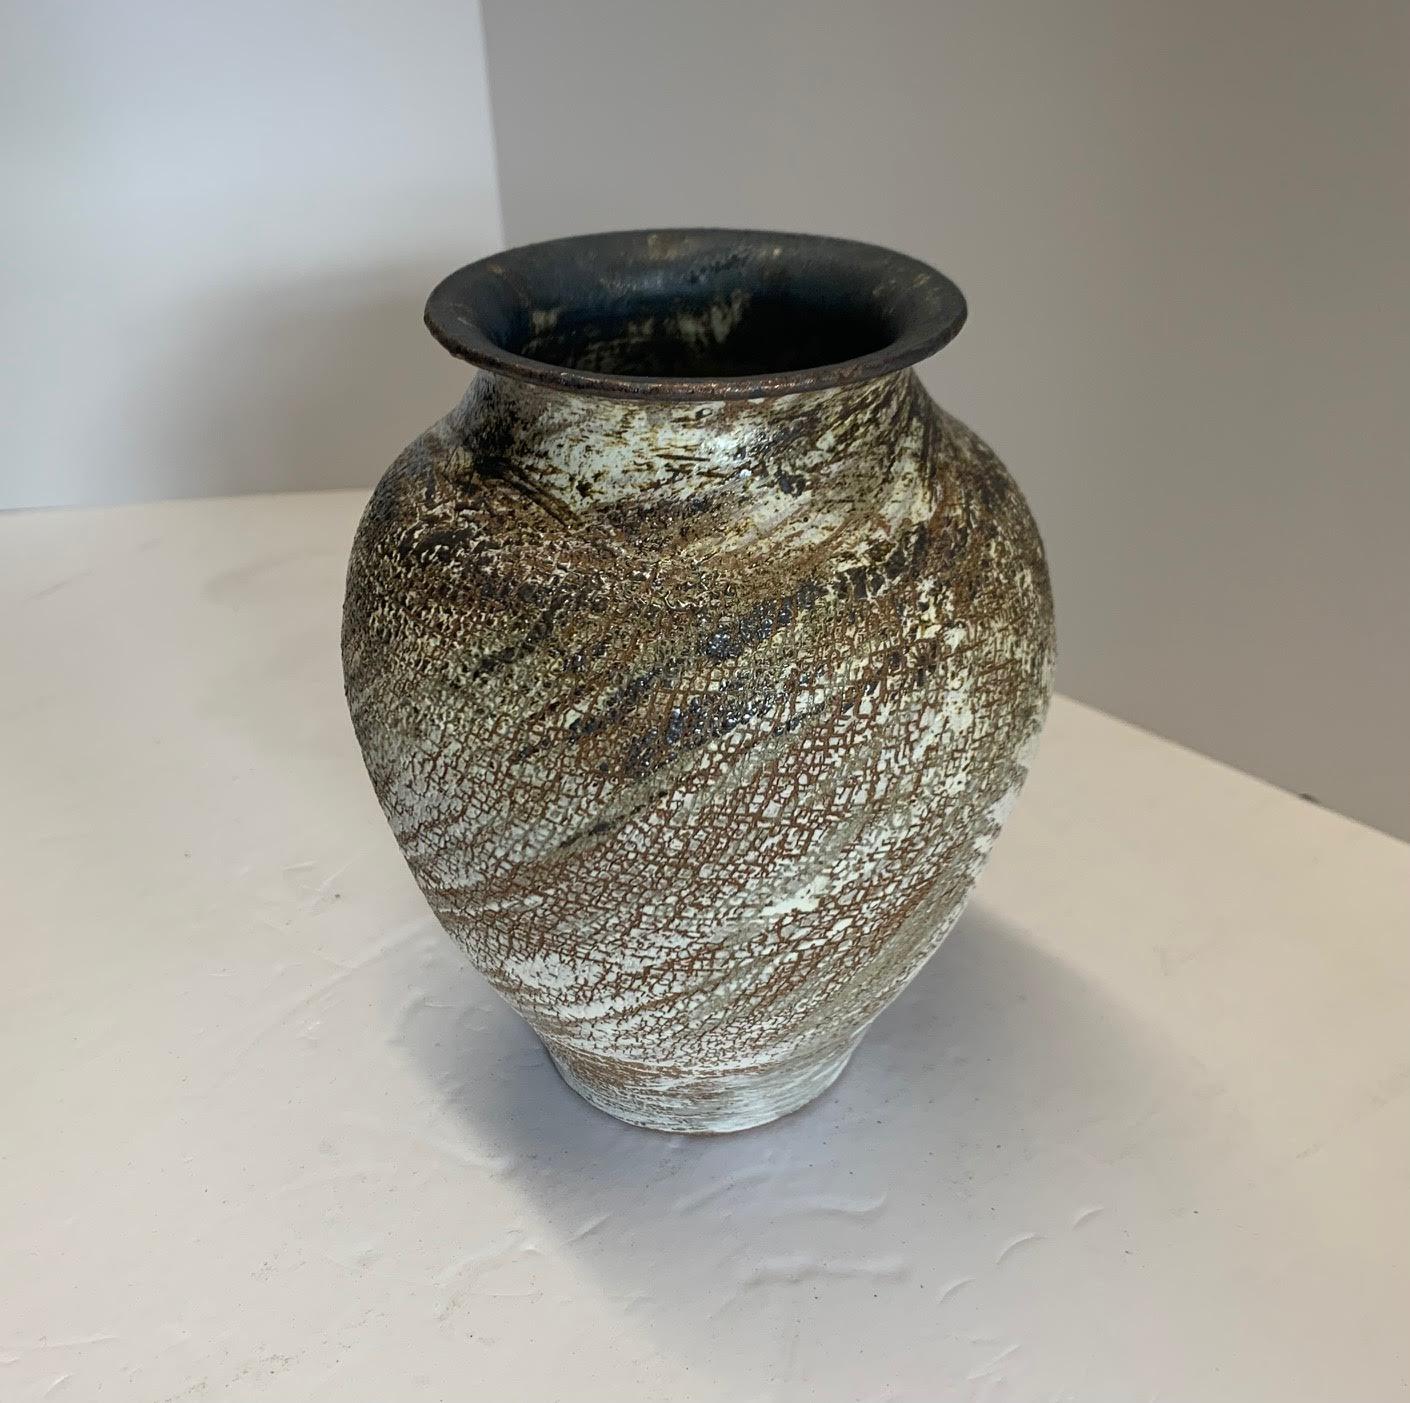 Contemporary American ceramist Peter Speliopoulos stoneware vase.
The brown stoneware vessels are slipped in black and white, and then glazed with sweeping brushstrokes in various black, ivory and bronze glazes, to create an effect of erosion, as